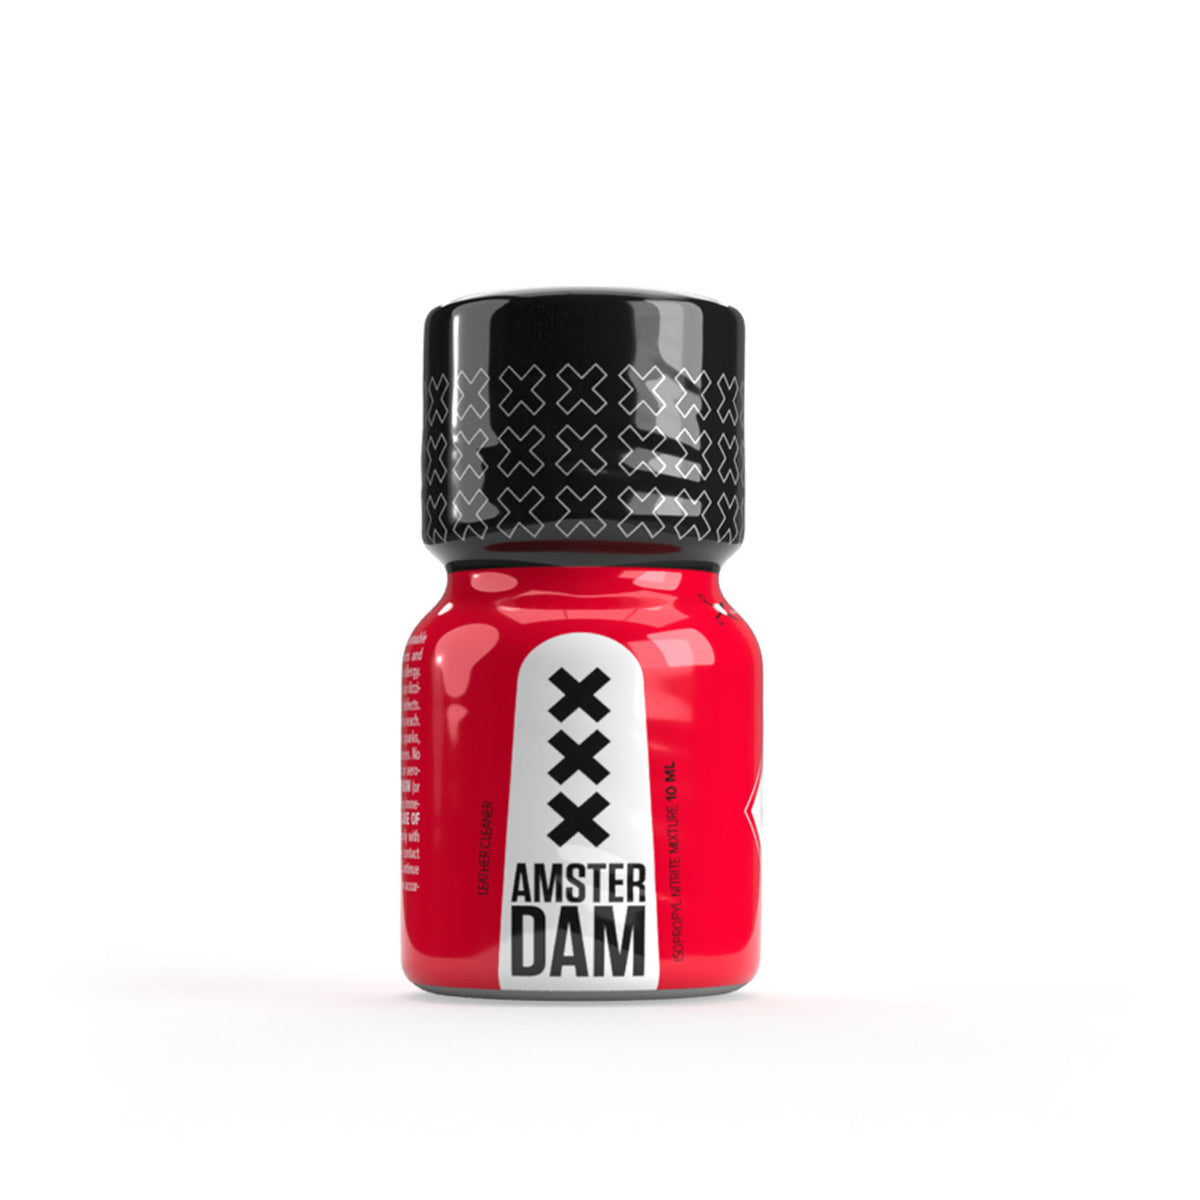 A product photo of a 10ml bottle of A'dam poppers.